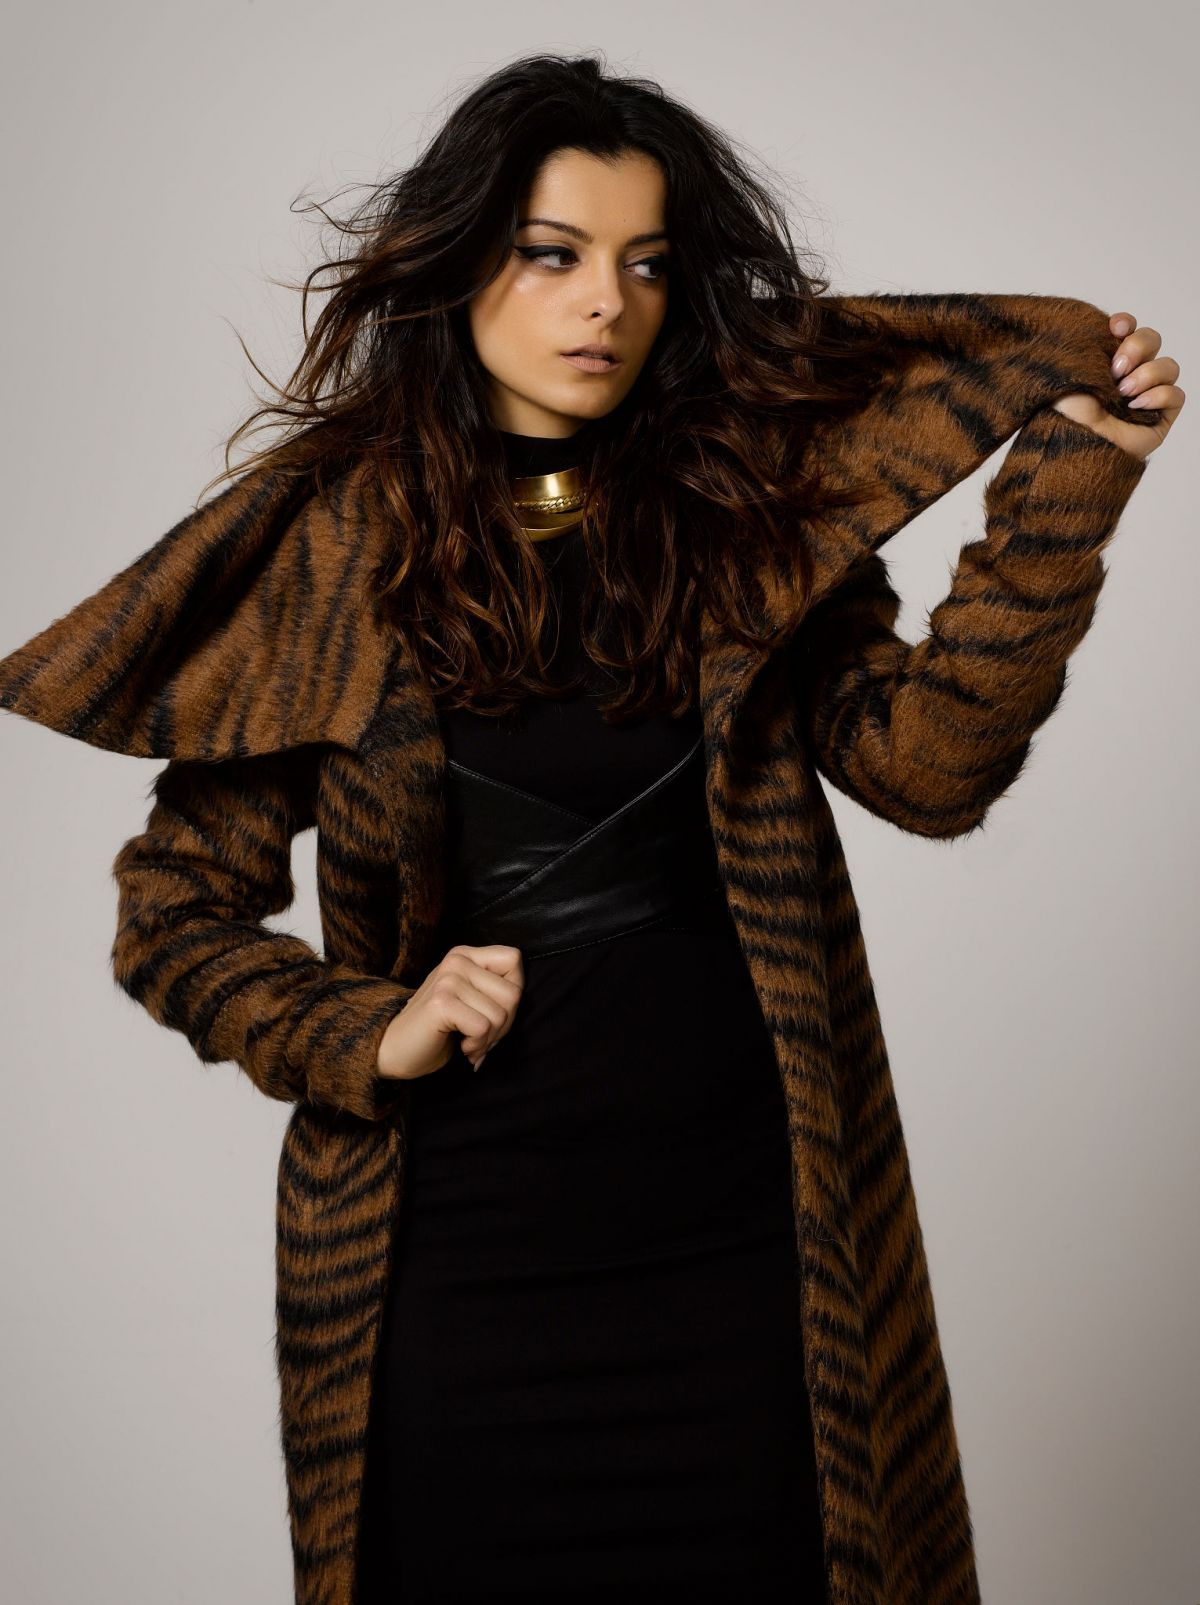 BEBE REXHA for The Untitled Magazine, 2015 – HawtCelebs